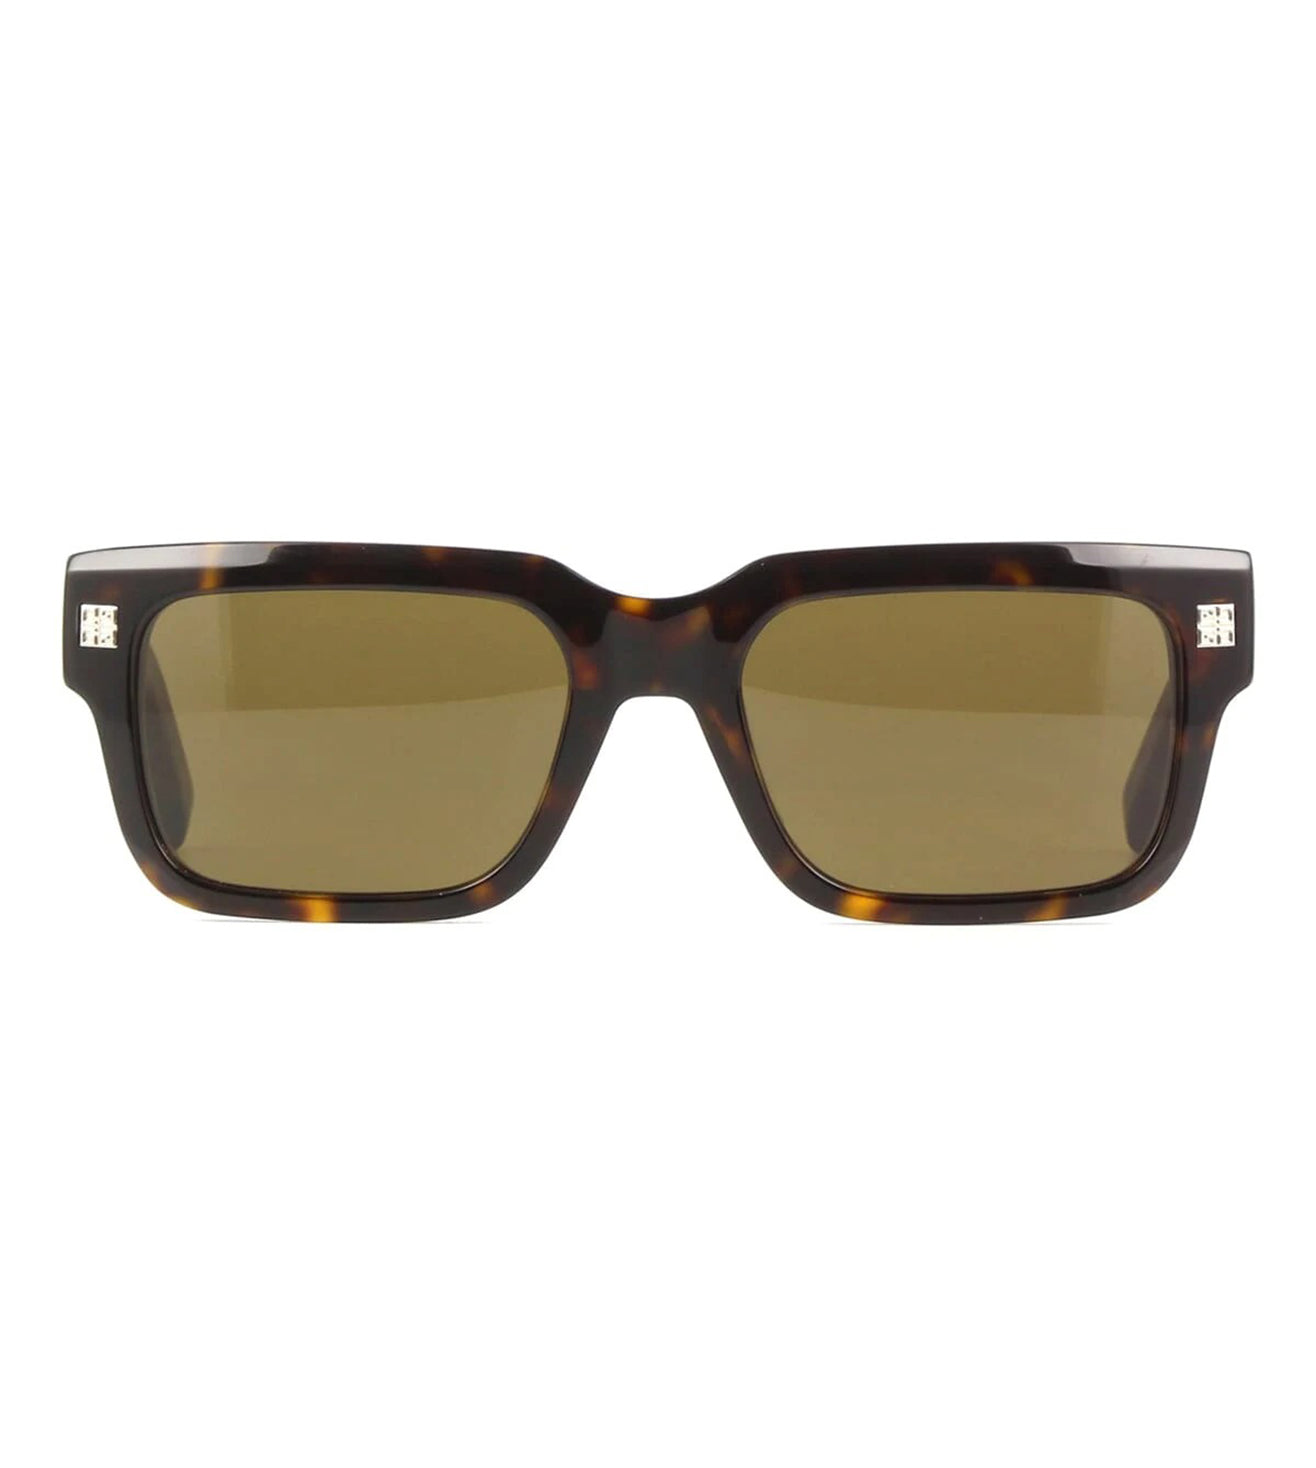 Givenchy Unisex Brown Square Sunglasses